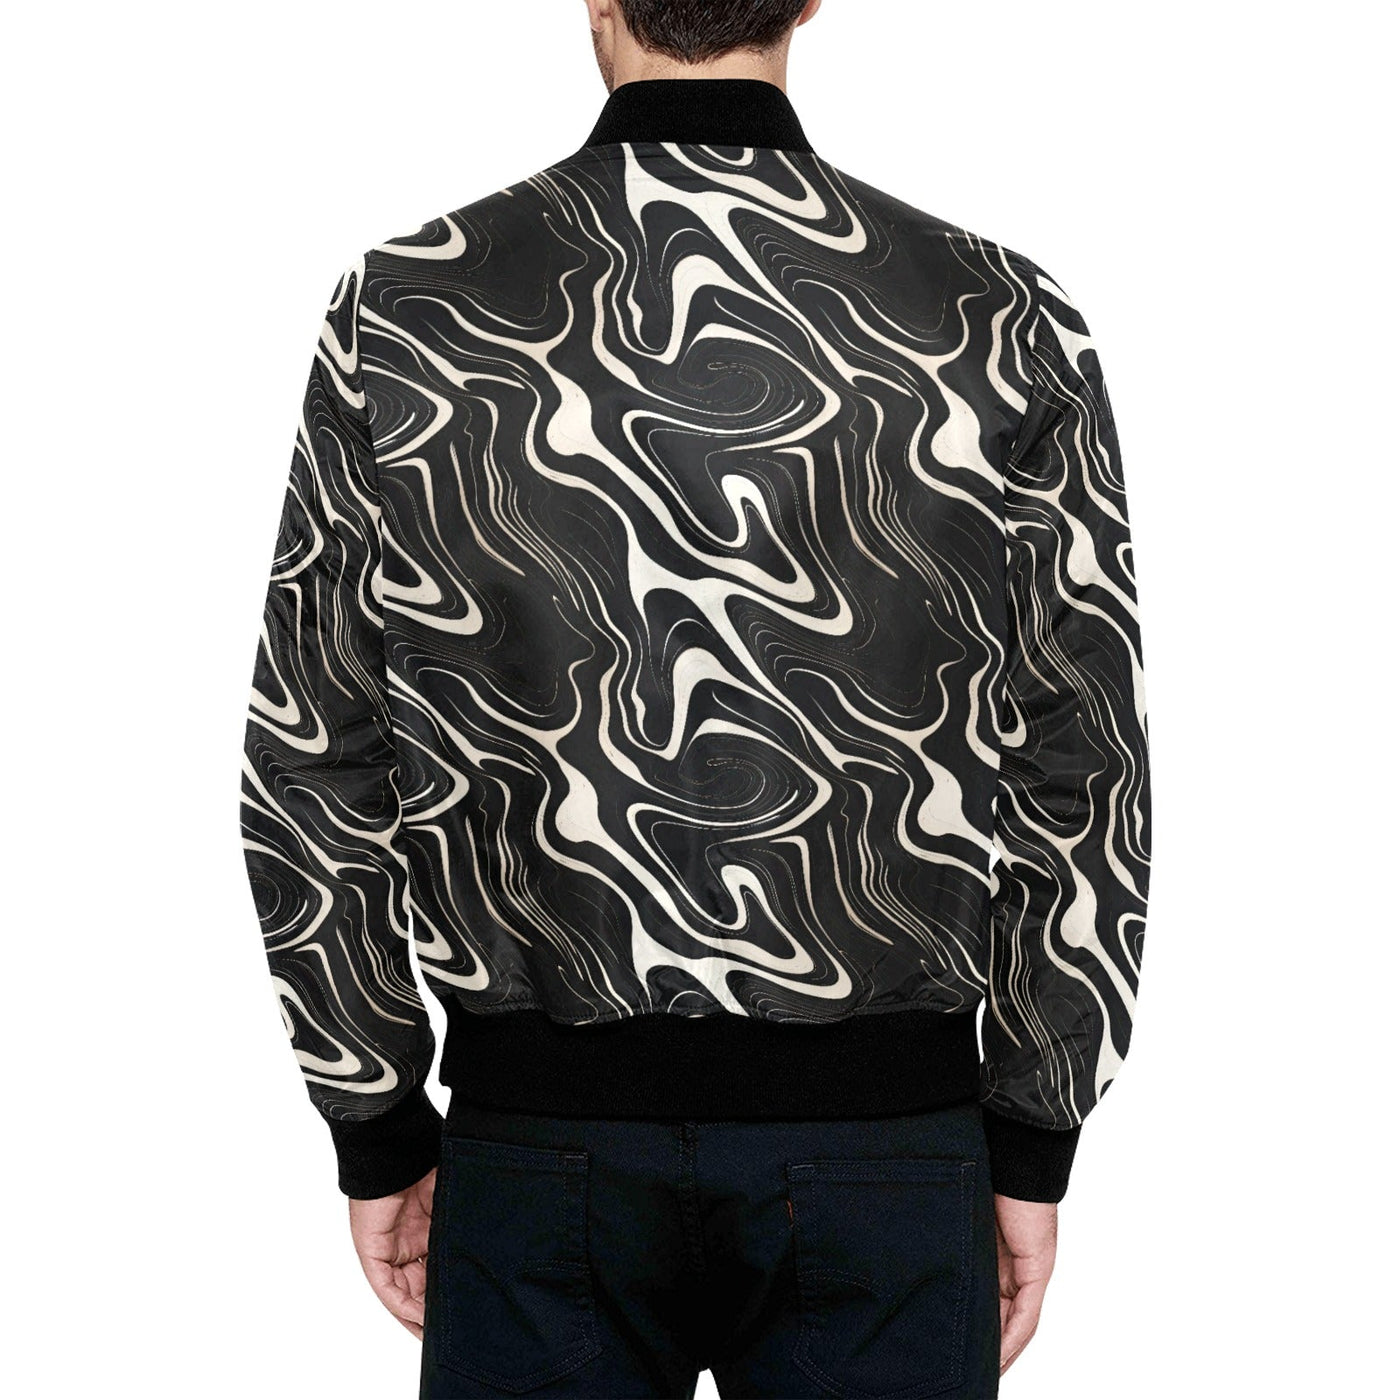 Wavy Black and White Abstract Pattern Quilted Bomber Jacket